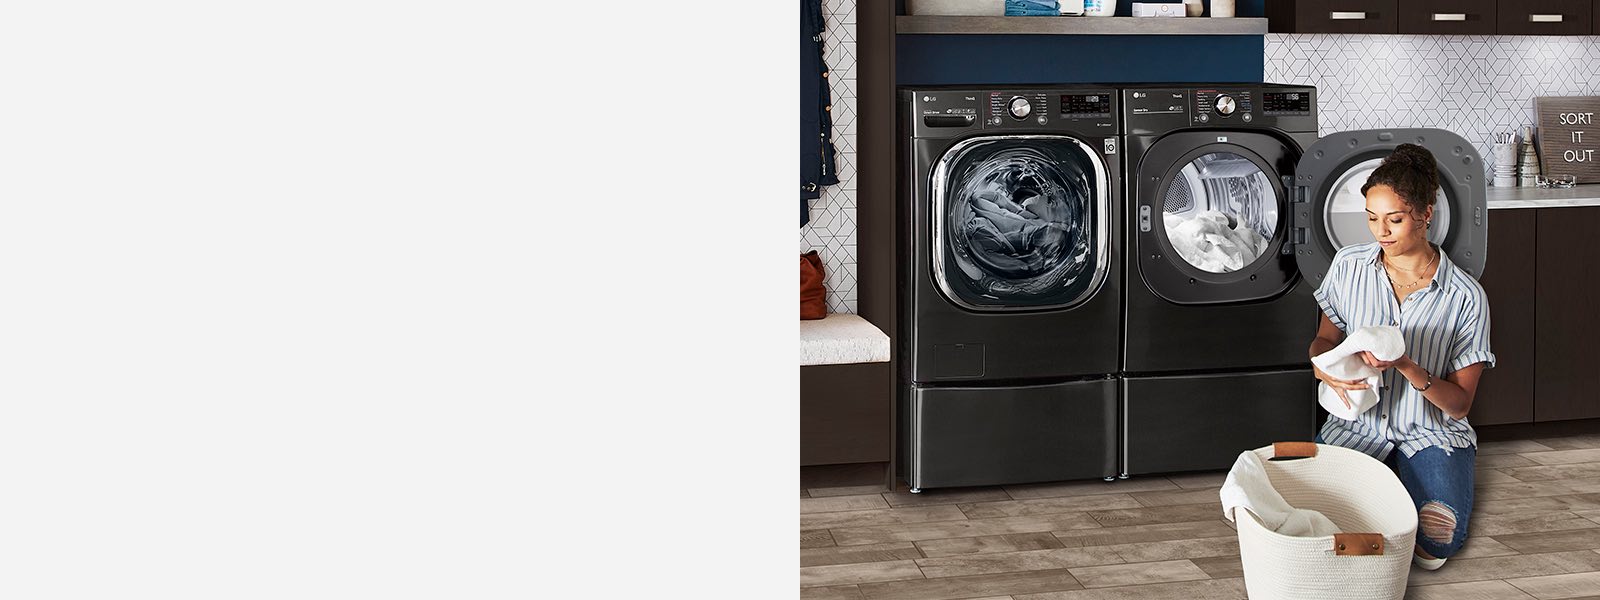 Smart Dryers for foolproof results